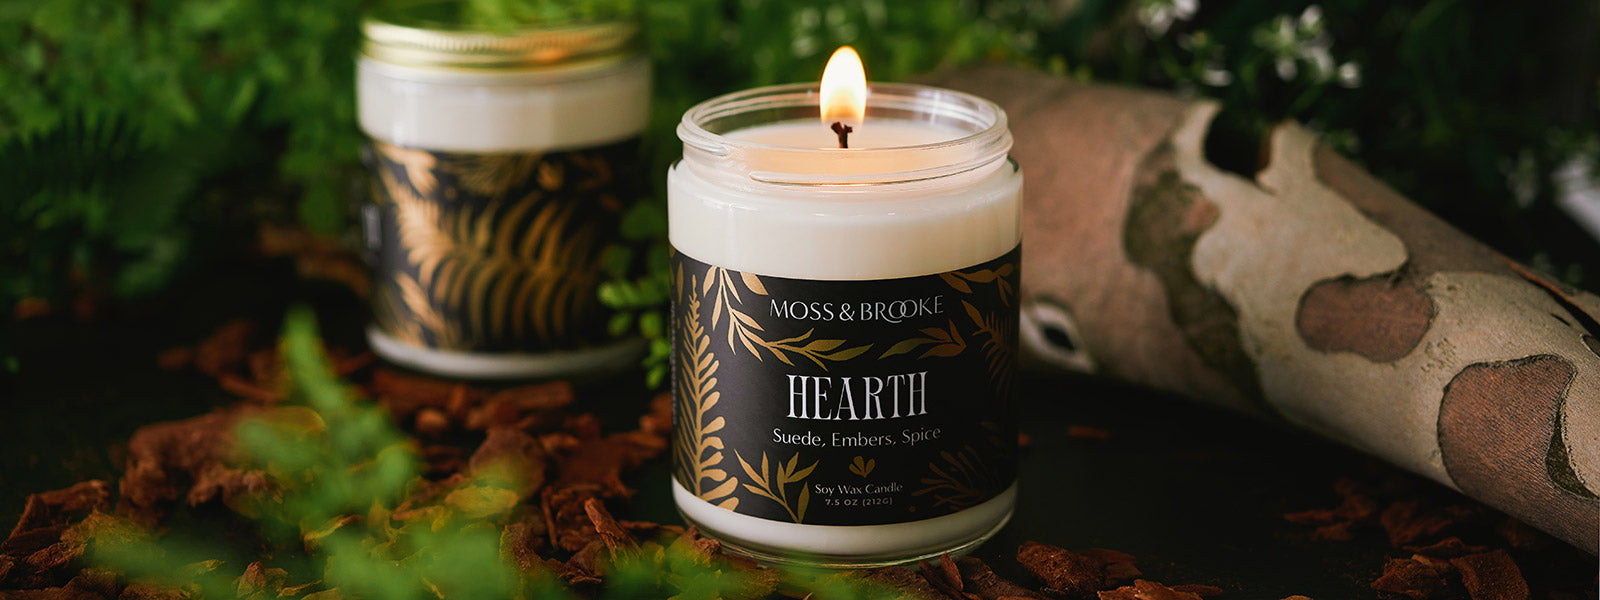 Moss & Brooke Hearth Candle sits in a forest setting, it's gold foil on black label bringing a sophisticated option for gifting.